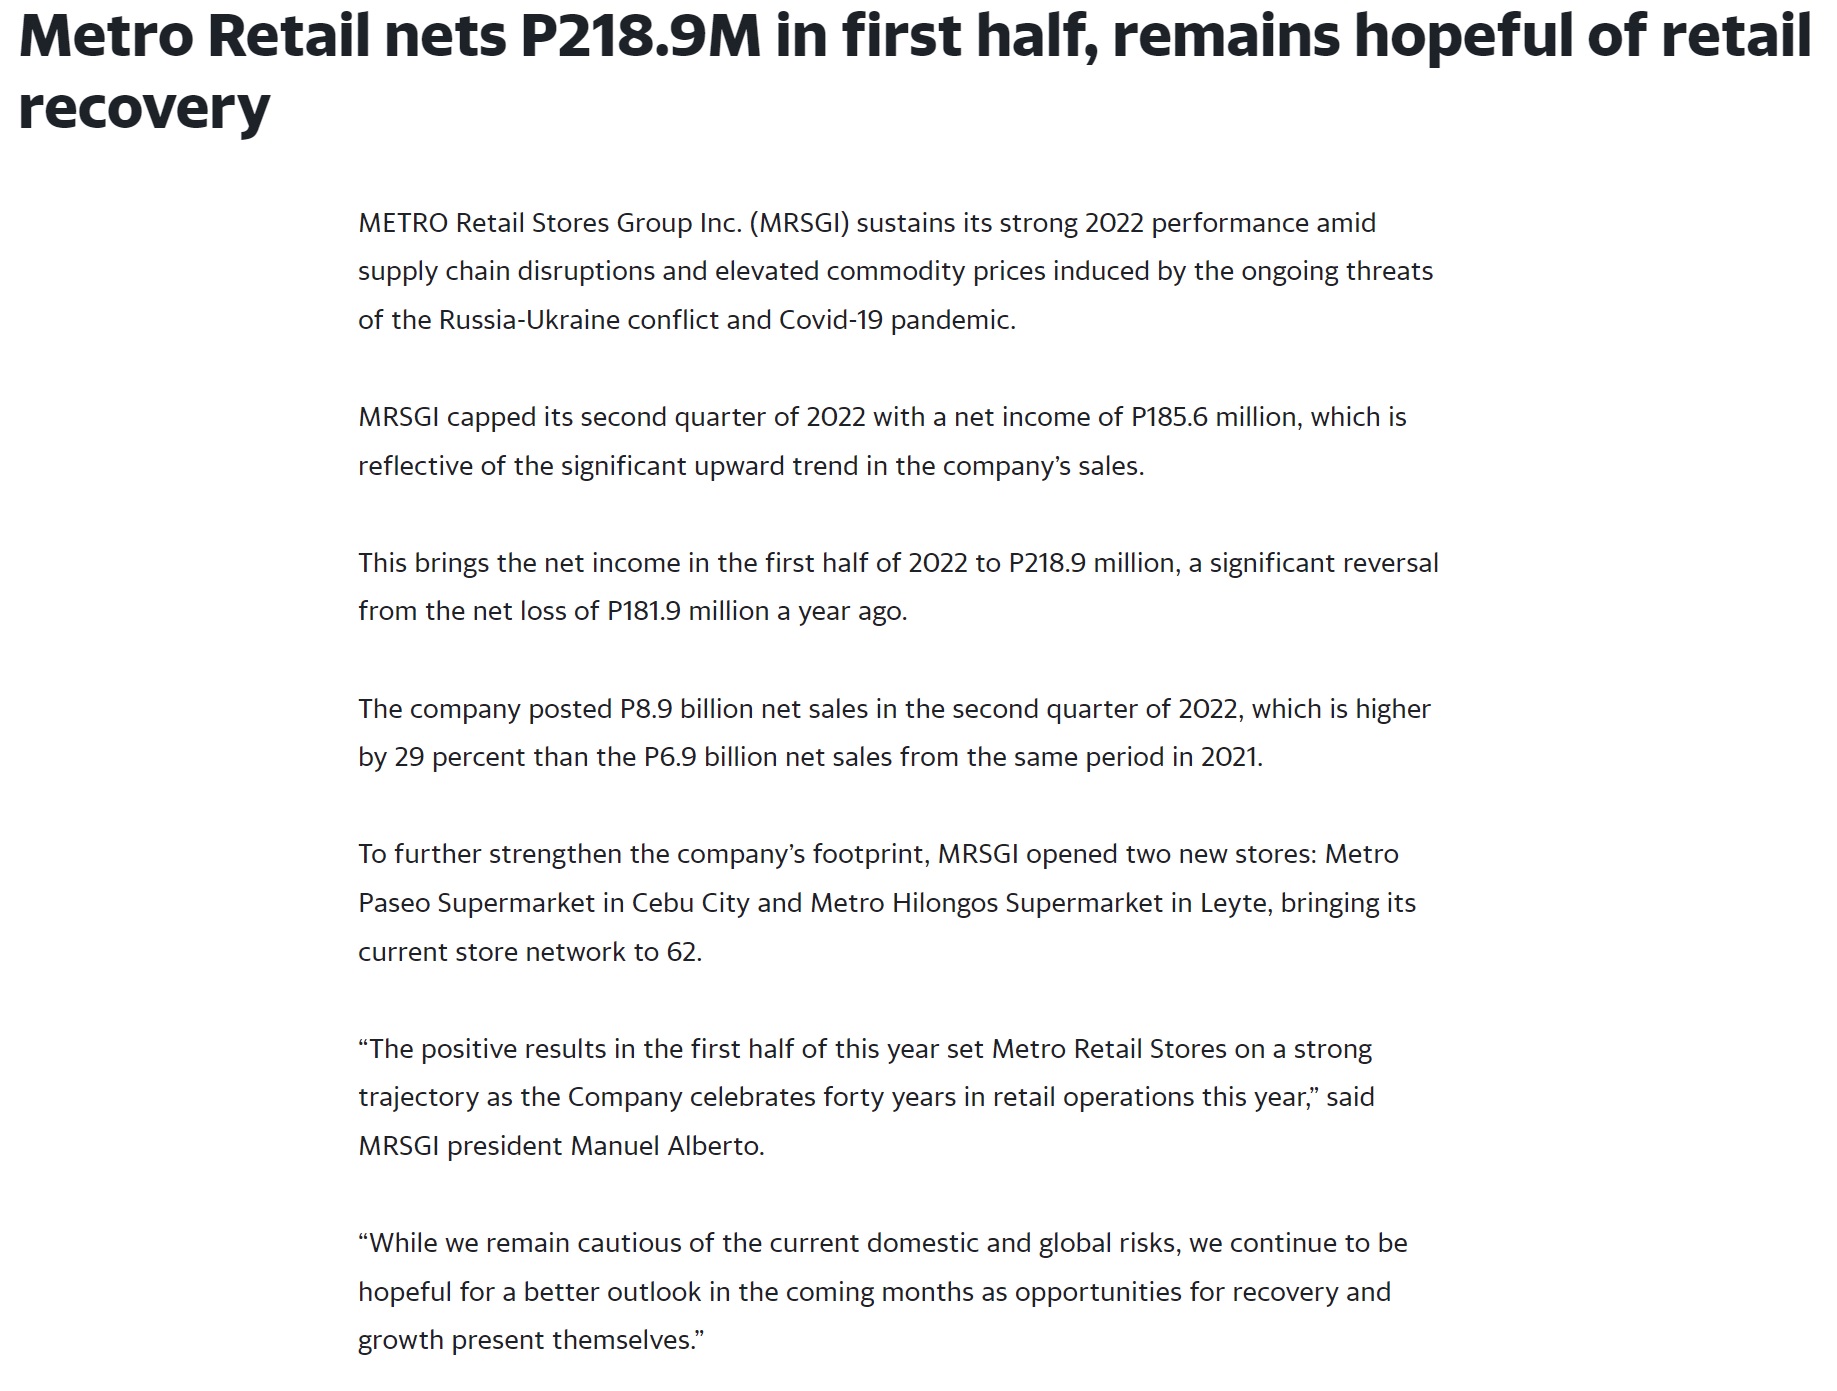 Yahoo News Metro Retail nets P218.9M in first half remains hopeful of retail recovery